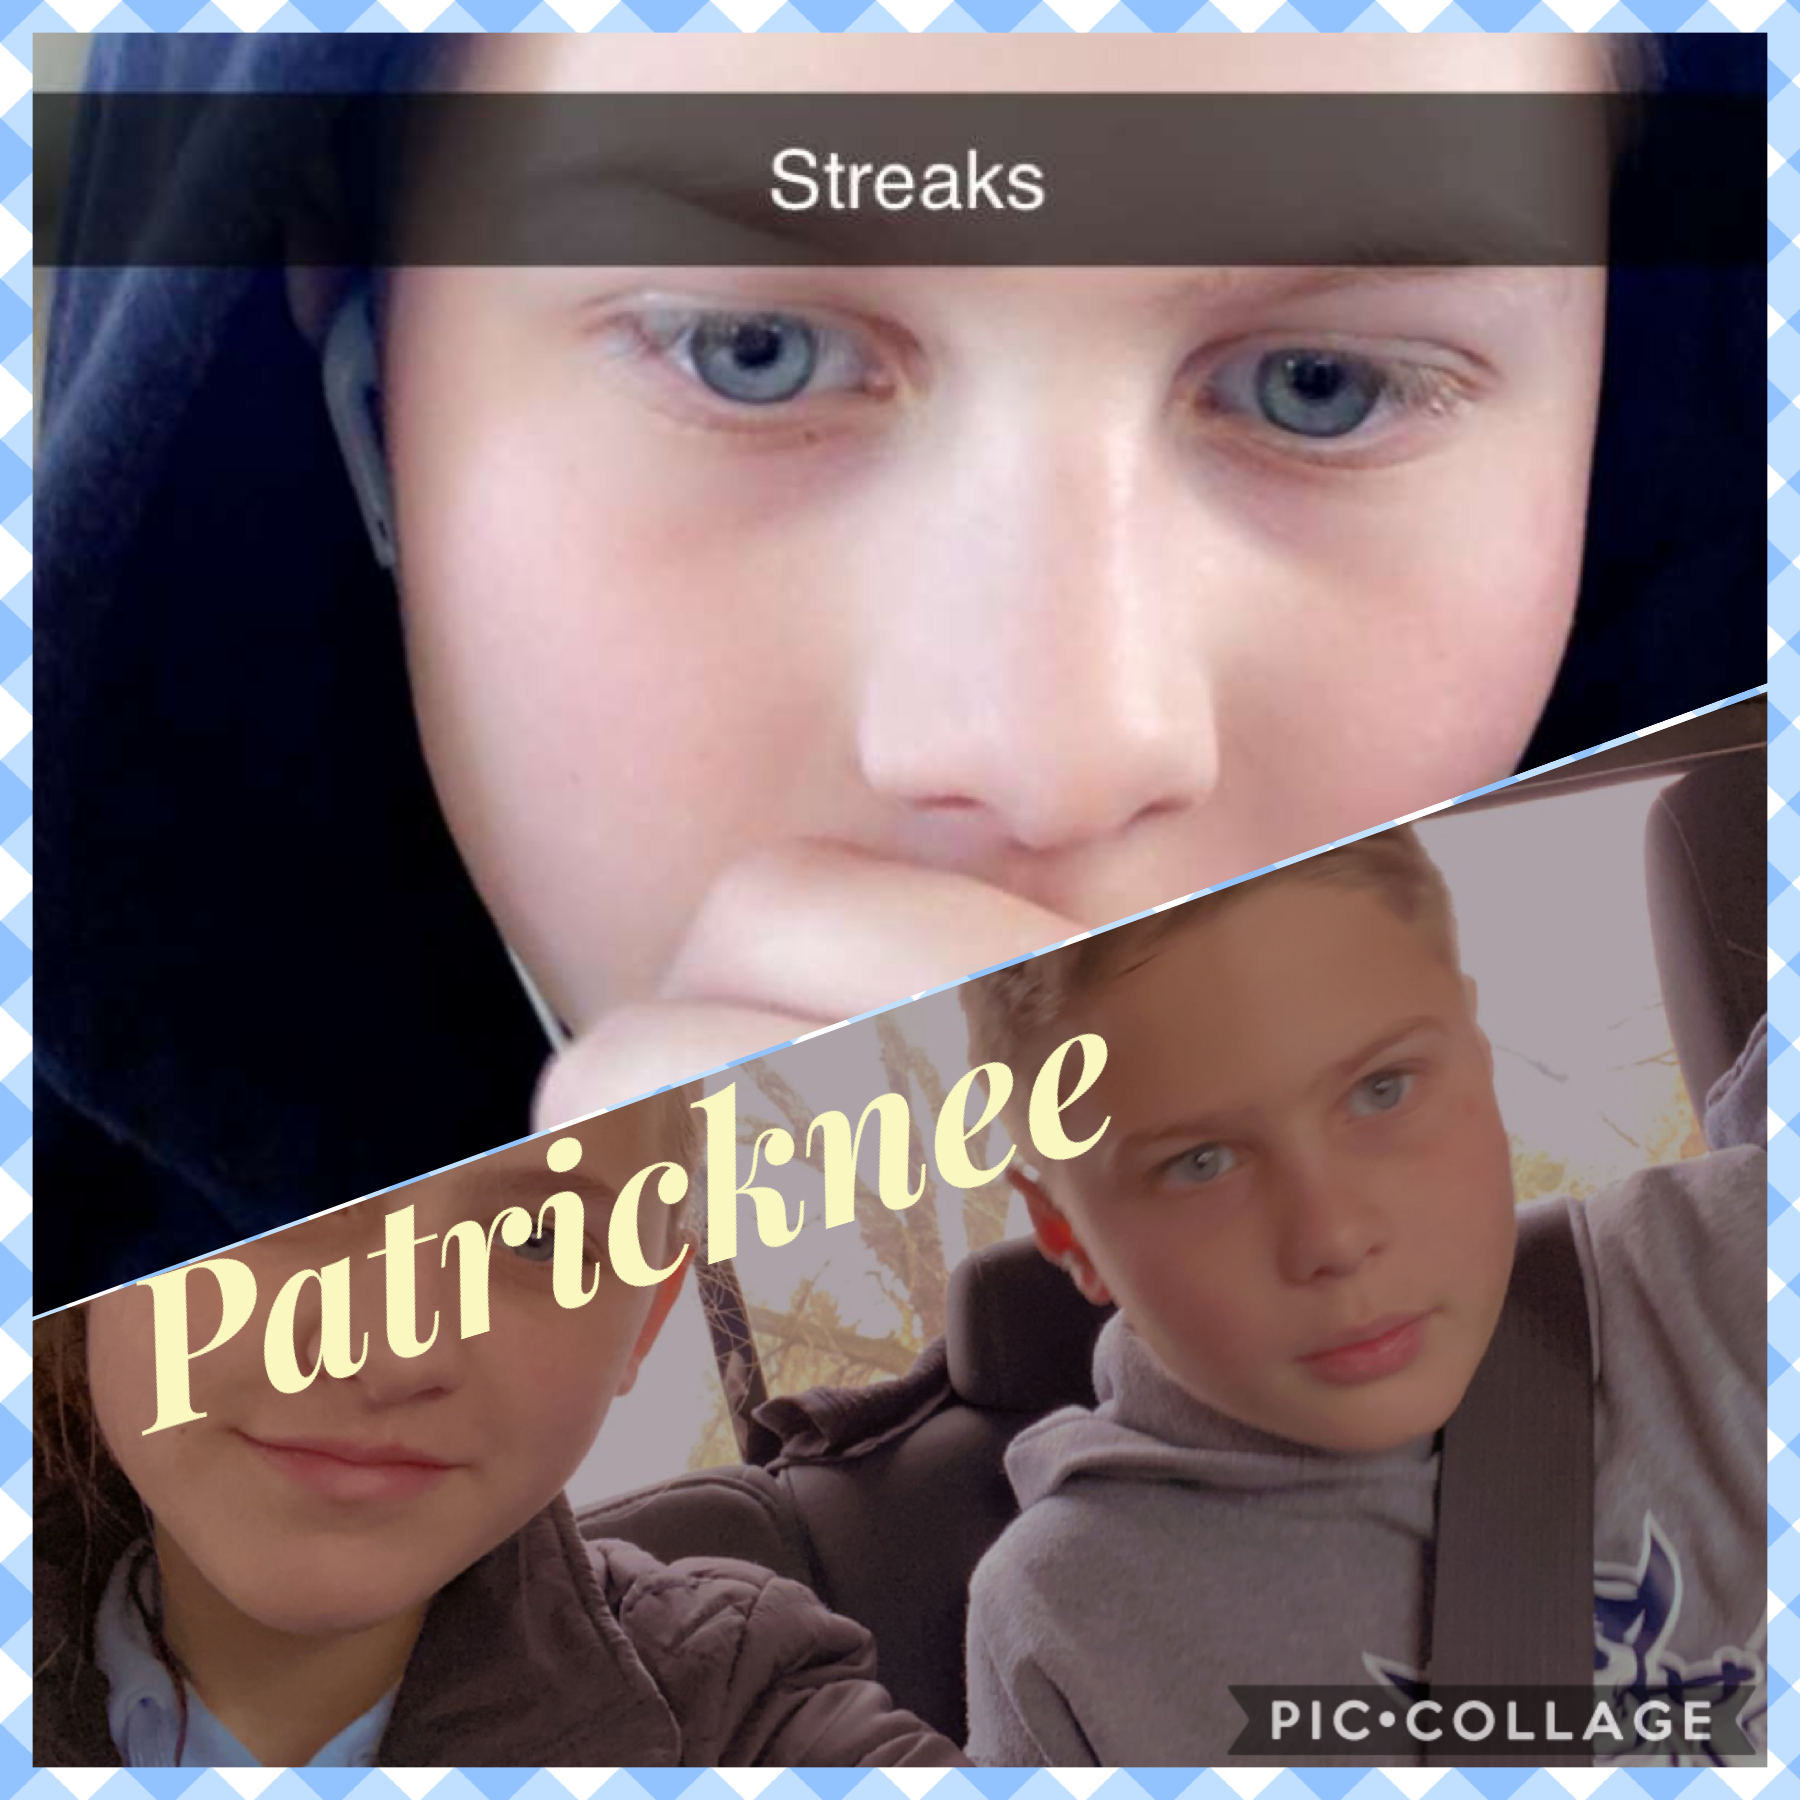 Hey guys my brother started a new account go show him love and follow him his name is above and here- Patricknee 

-Ava